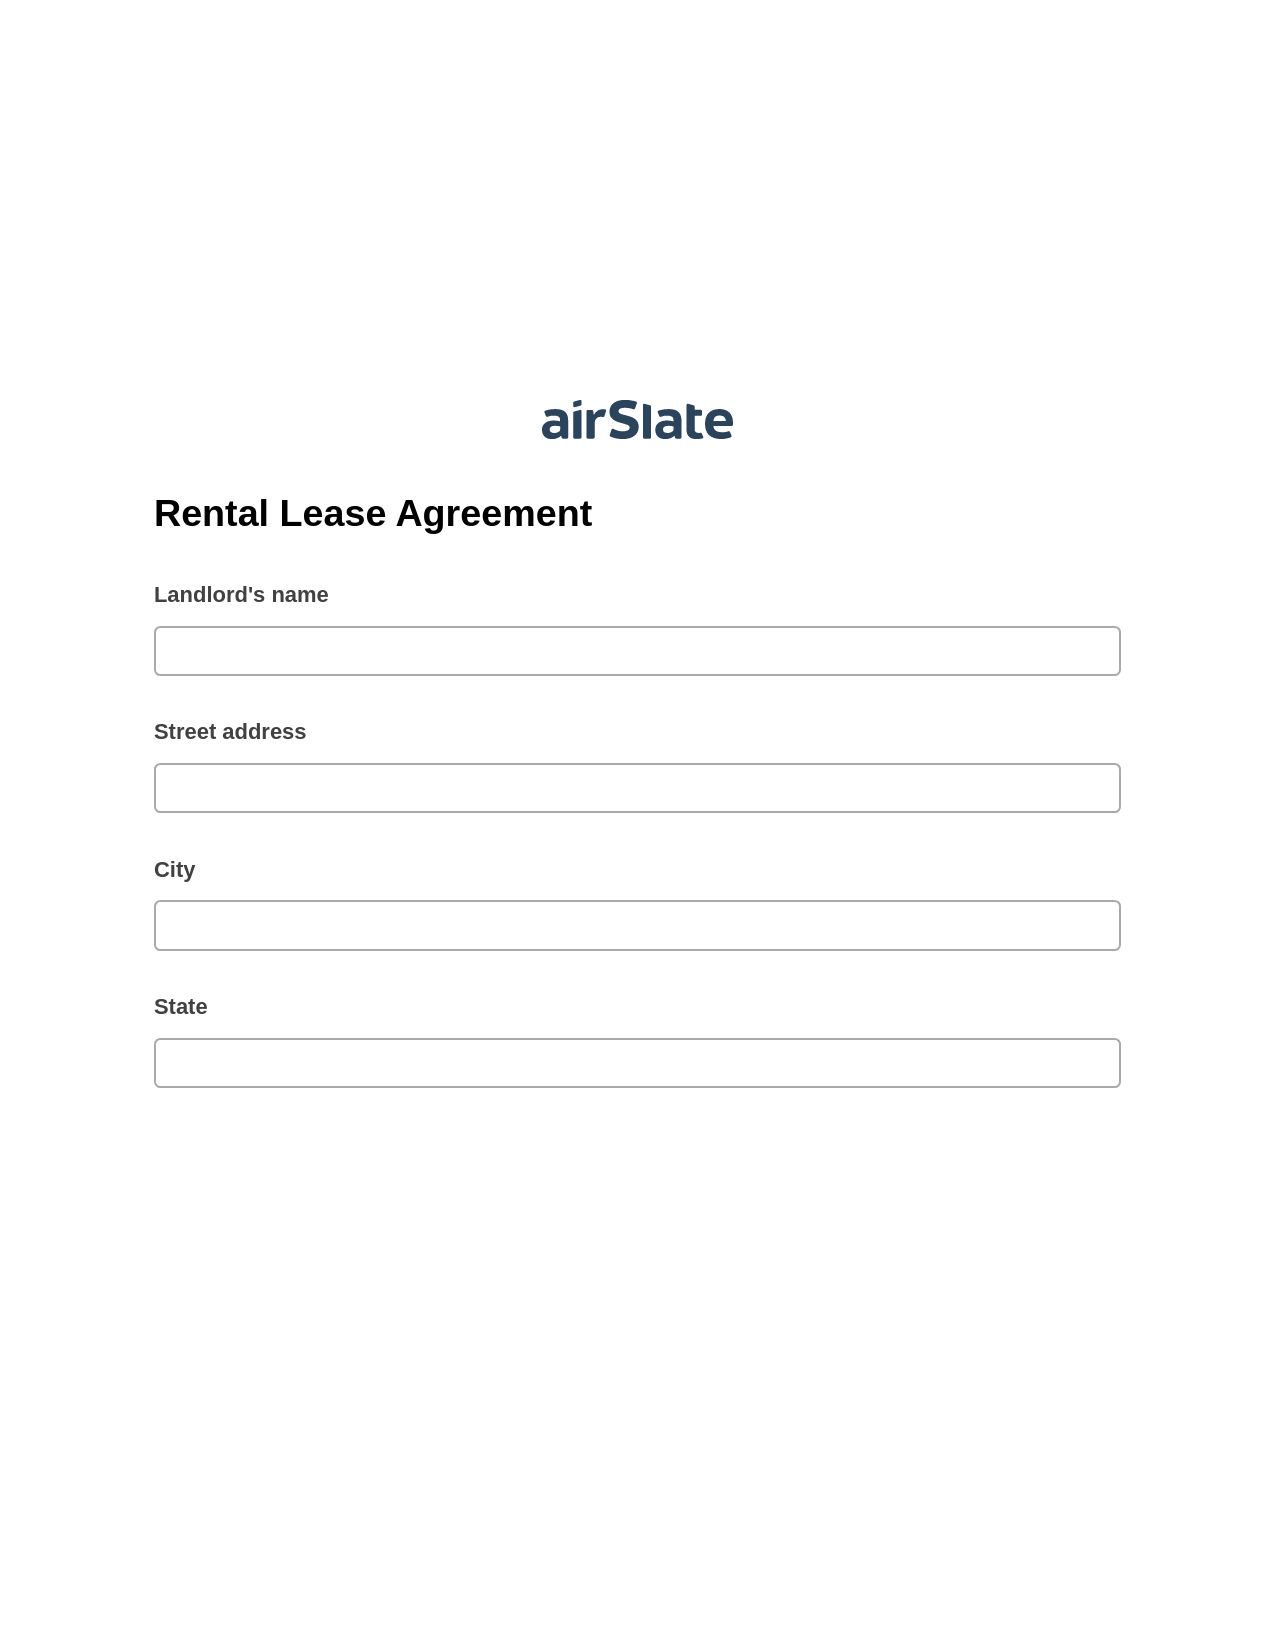 Rental Lease Agreement Pre-fill from CSV File Dropdown Options Bot, Jira Bot, Archive to SharePoint Folder Bot